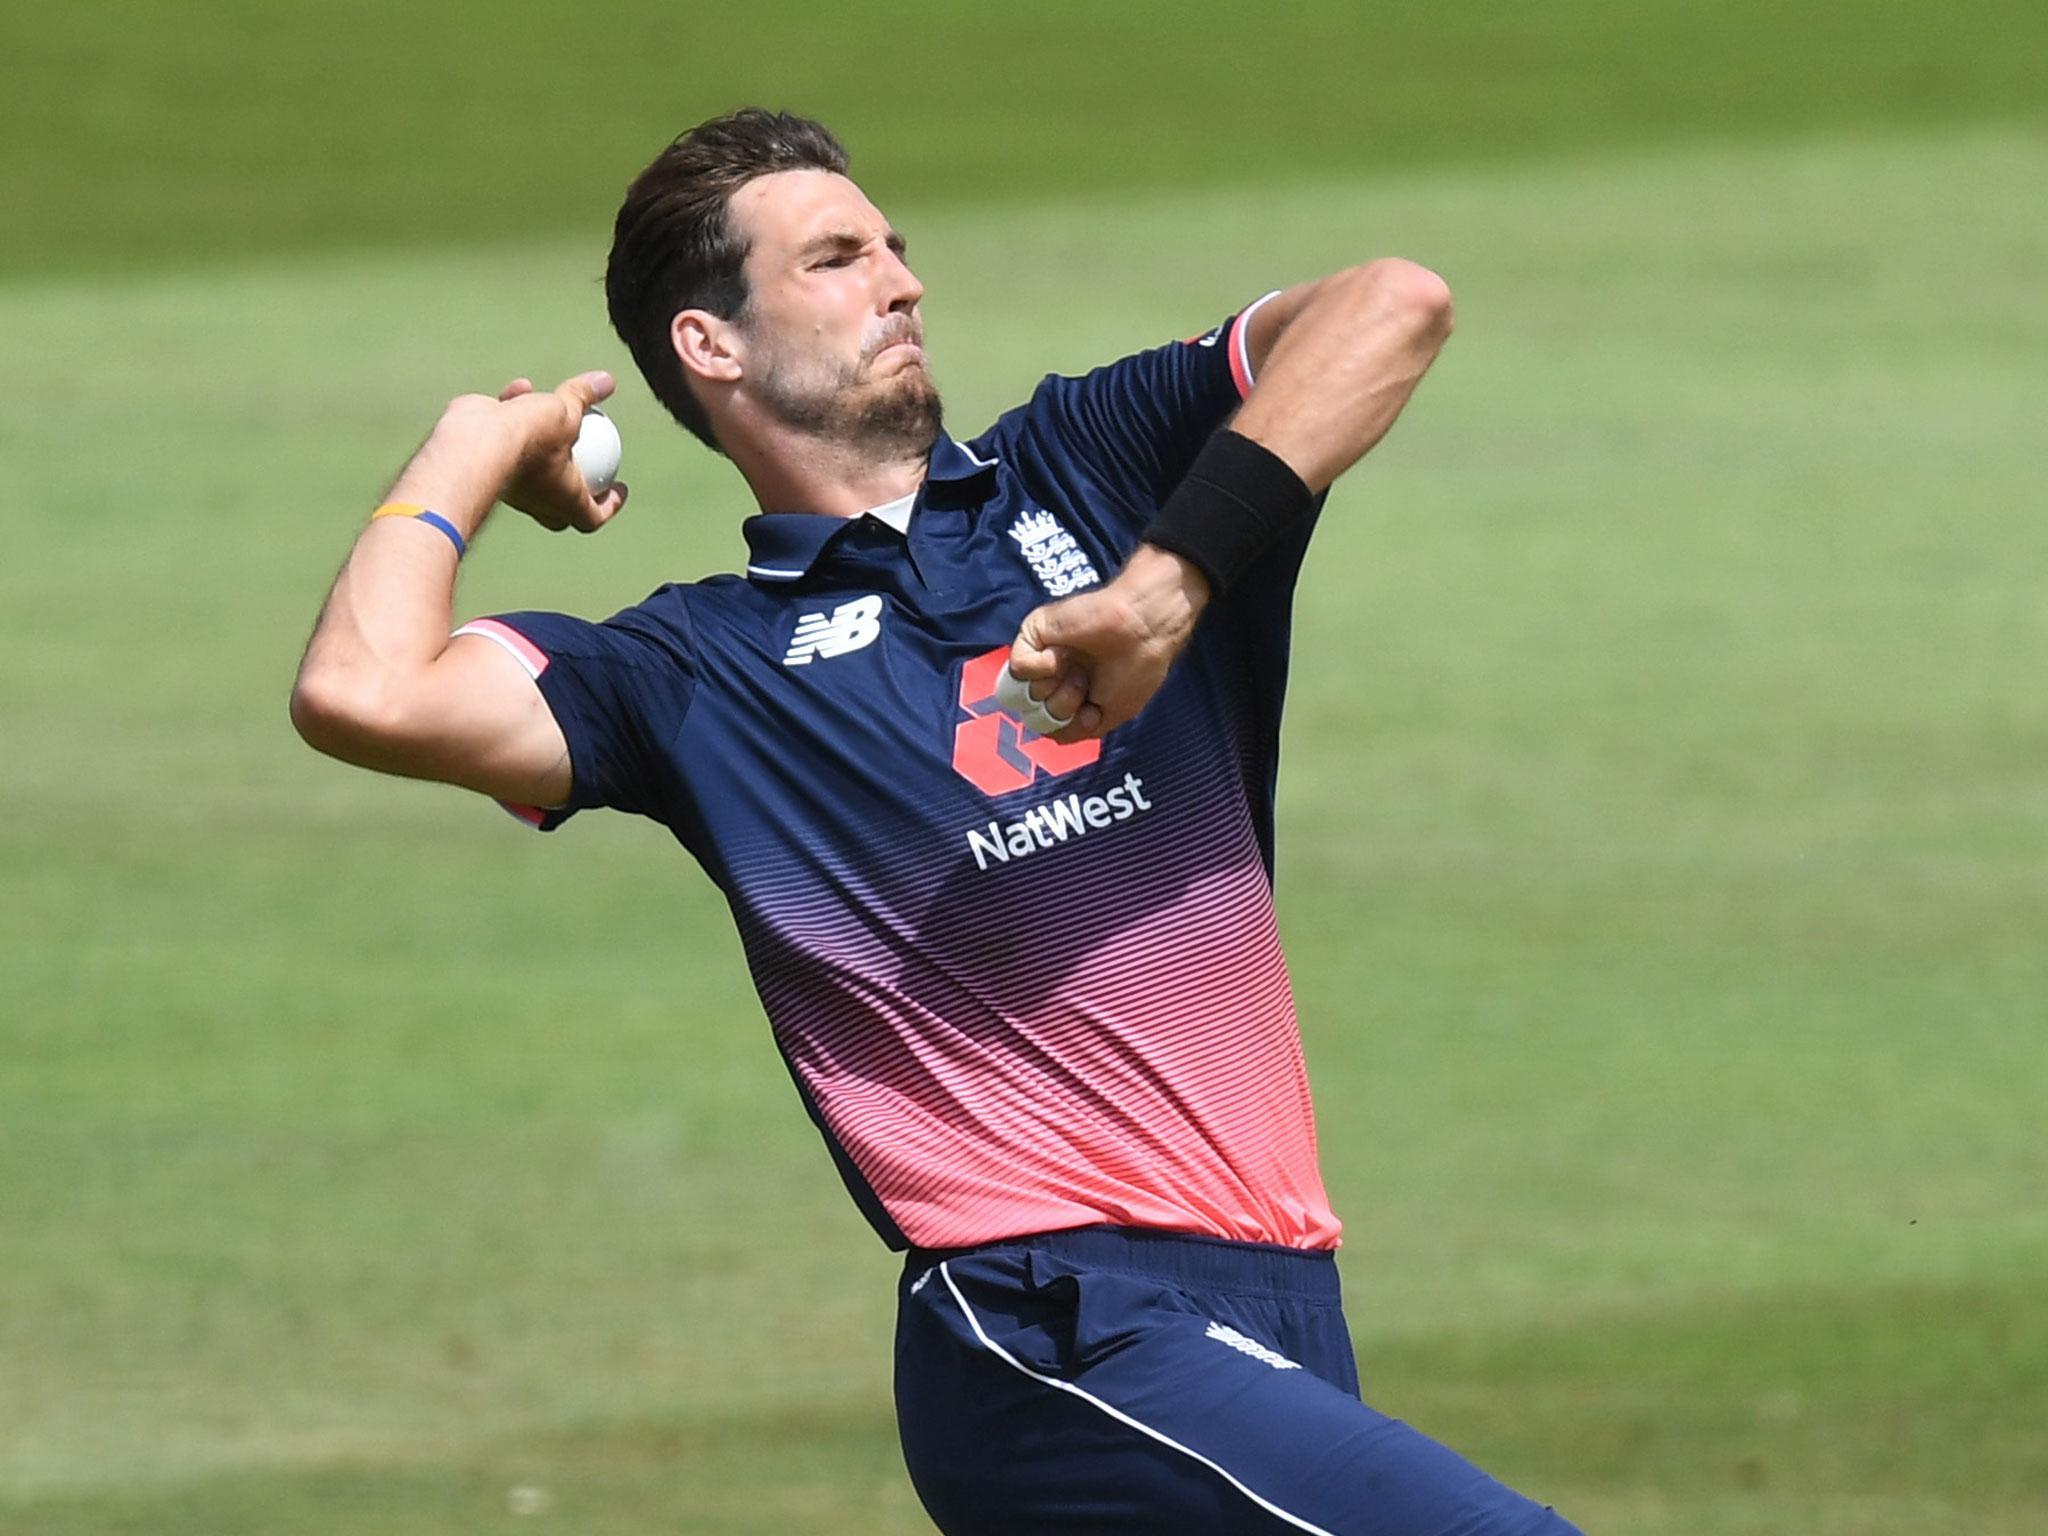 Steven Finn has been called up to replace the injured Chris Woakes